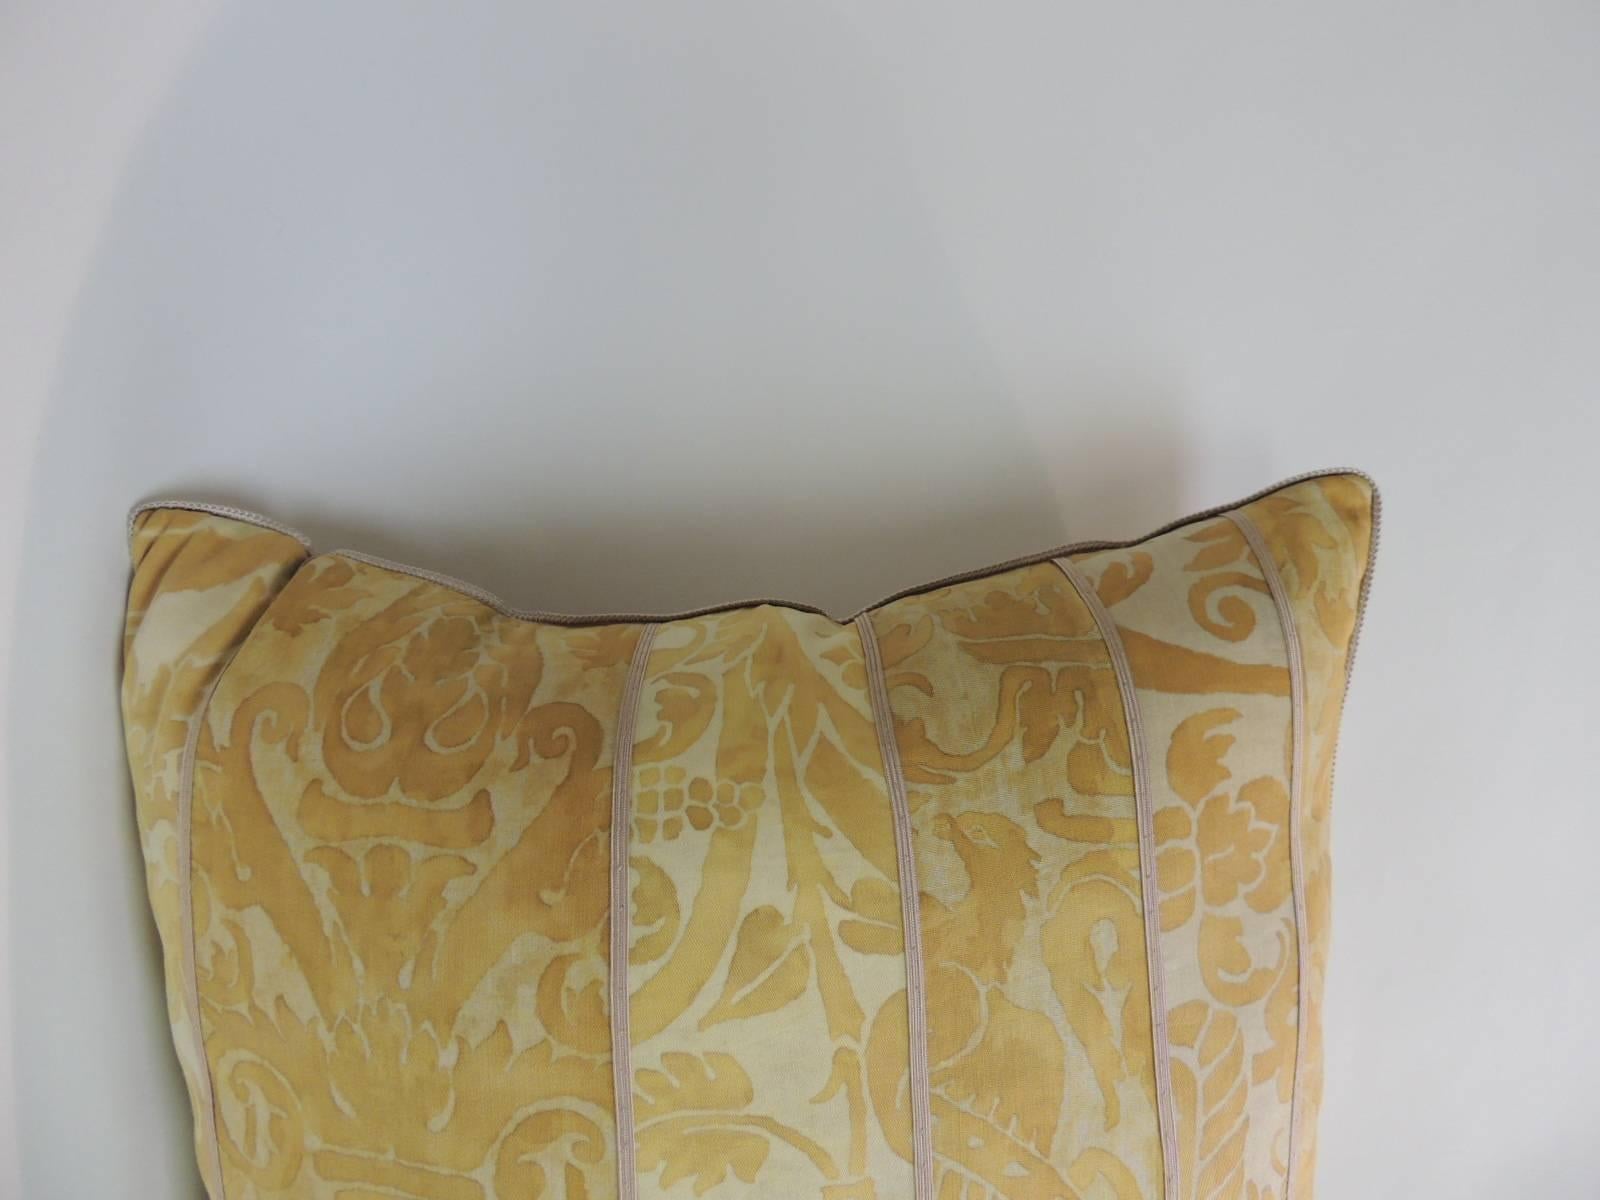 Antique Textiles Galleries:
Vintage yellow Fortuny Uccelli pattern decorative square pillow.
Vintage Uccelli Fortuny pattern decorative pillow hand-stitched patchwork style with decorative silk trims at the seams. Rope trim all around. Decorative